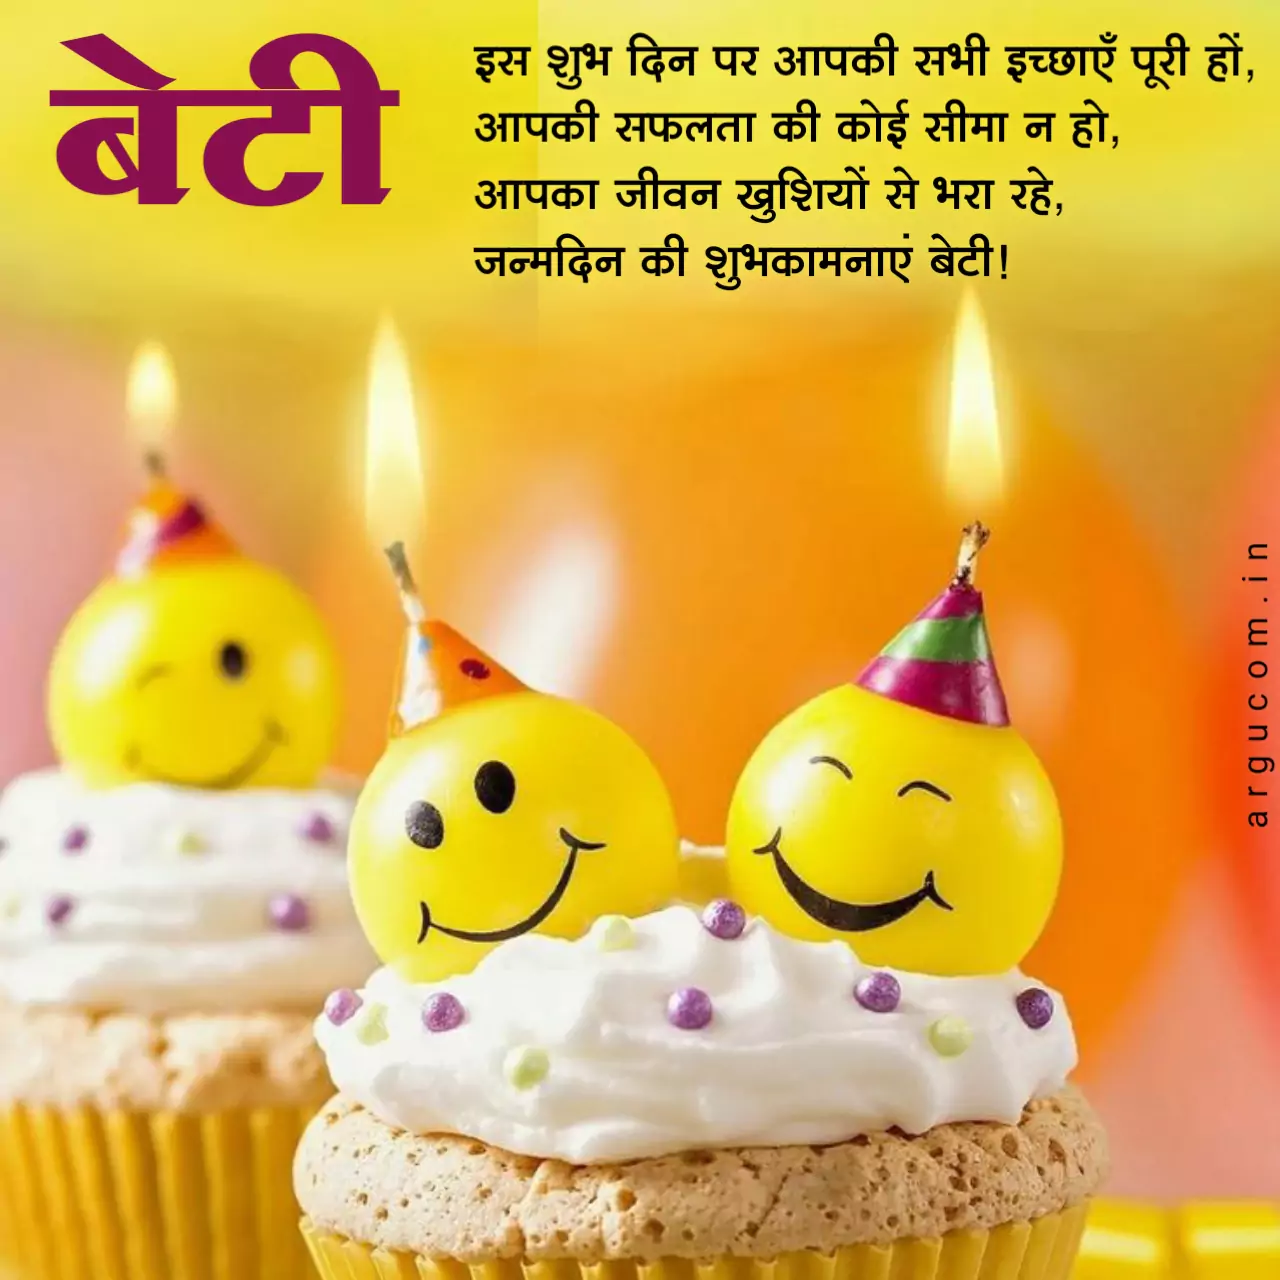 Happy birthday wishes for daughter in hindi